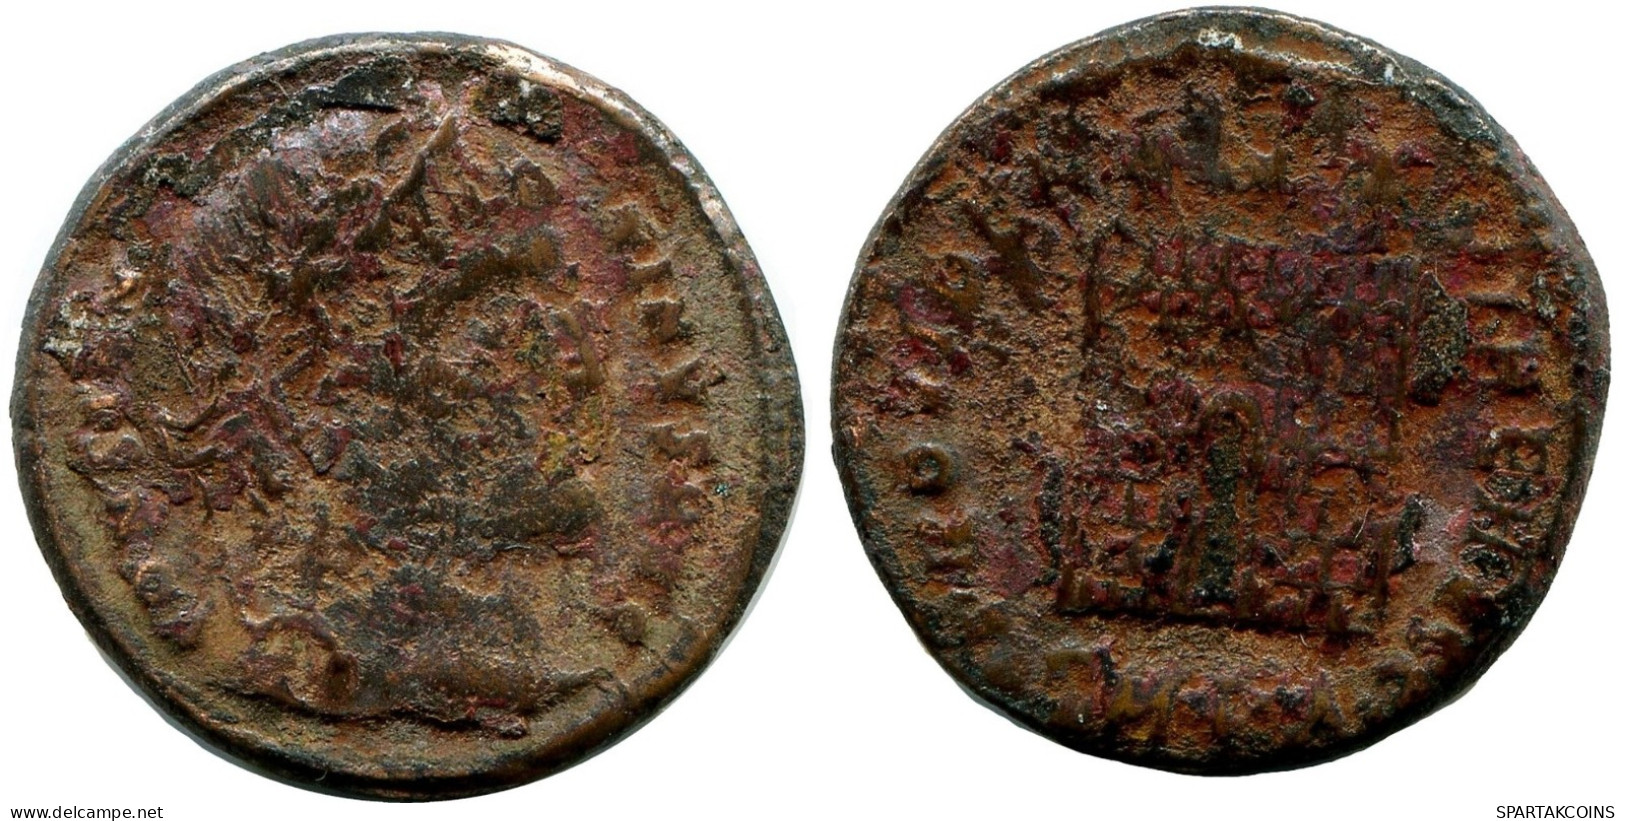 CONSTANTINE I MINTED IN CYZICUS FROM THE ROYAL ONTARIO MUSEUM #ANC11027.14.U.A - The Christian Empire (307 AD To 363 AD)